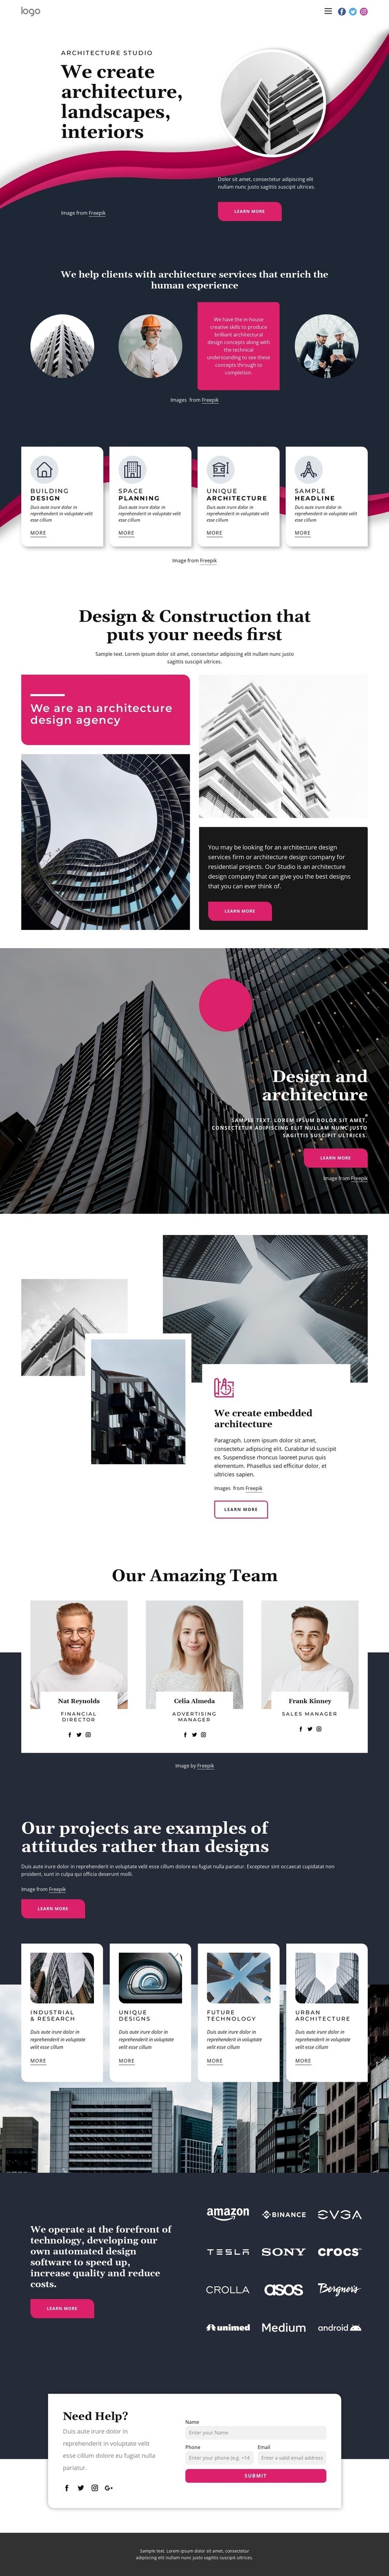 We create great architecture Web Page Design